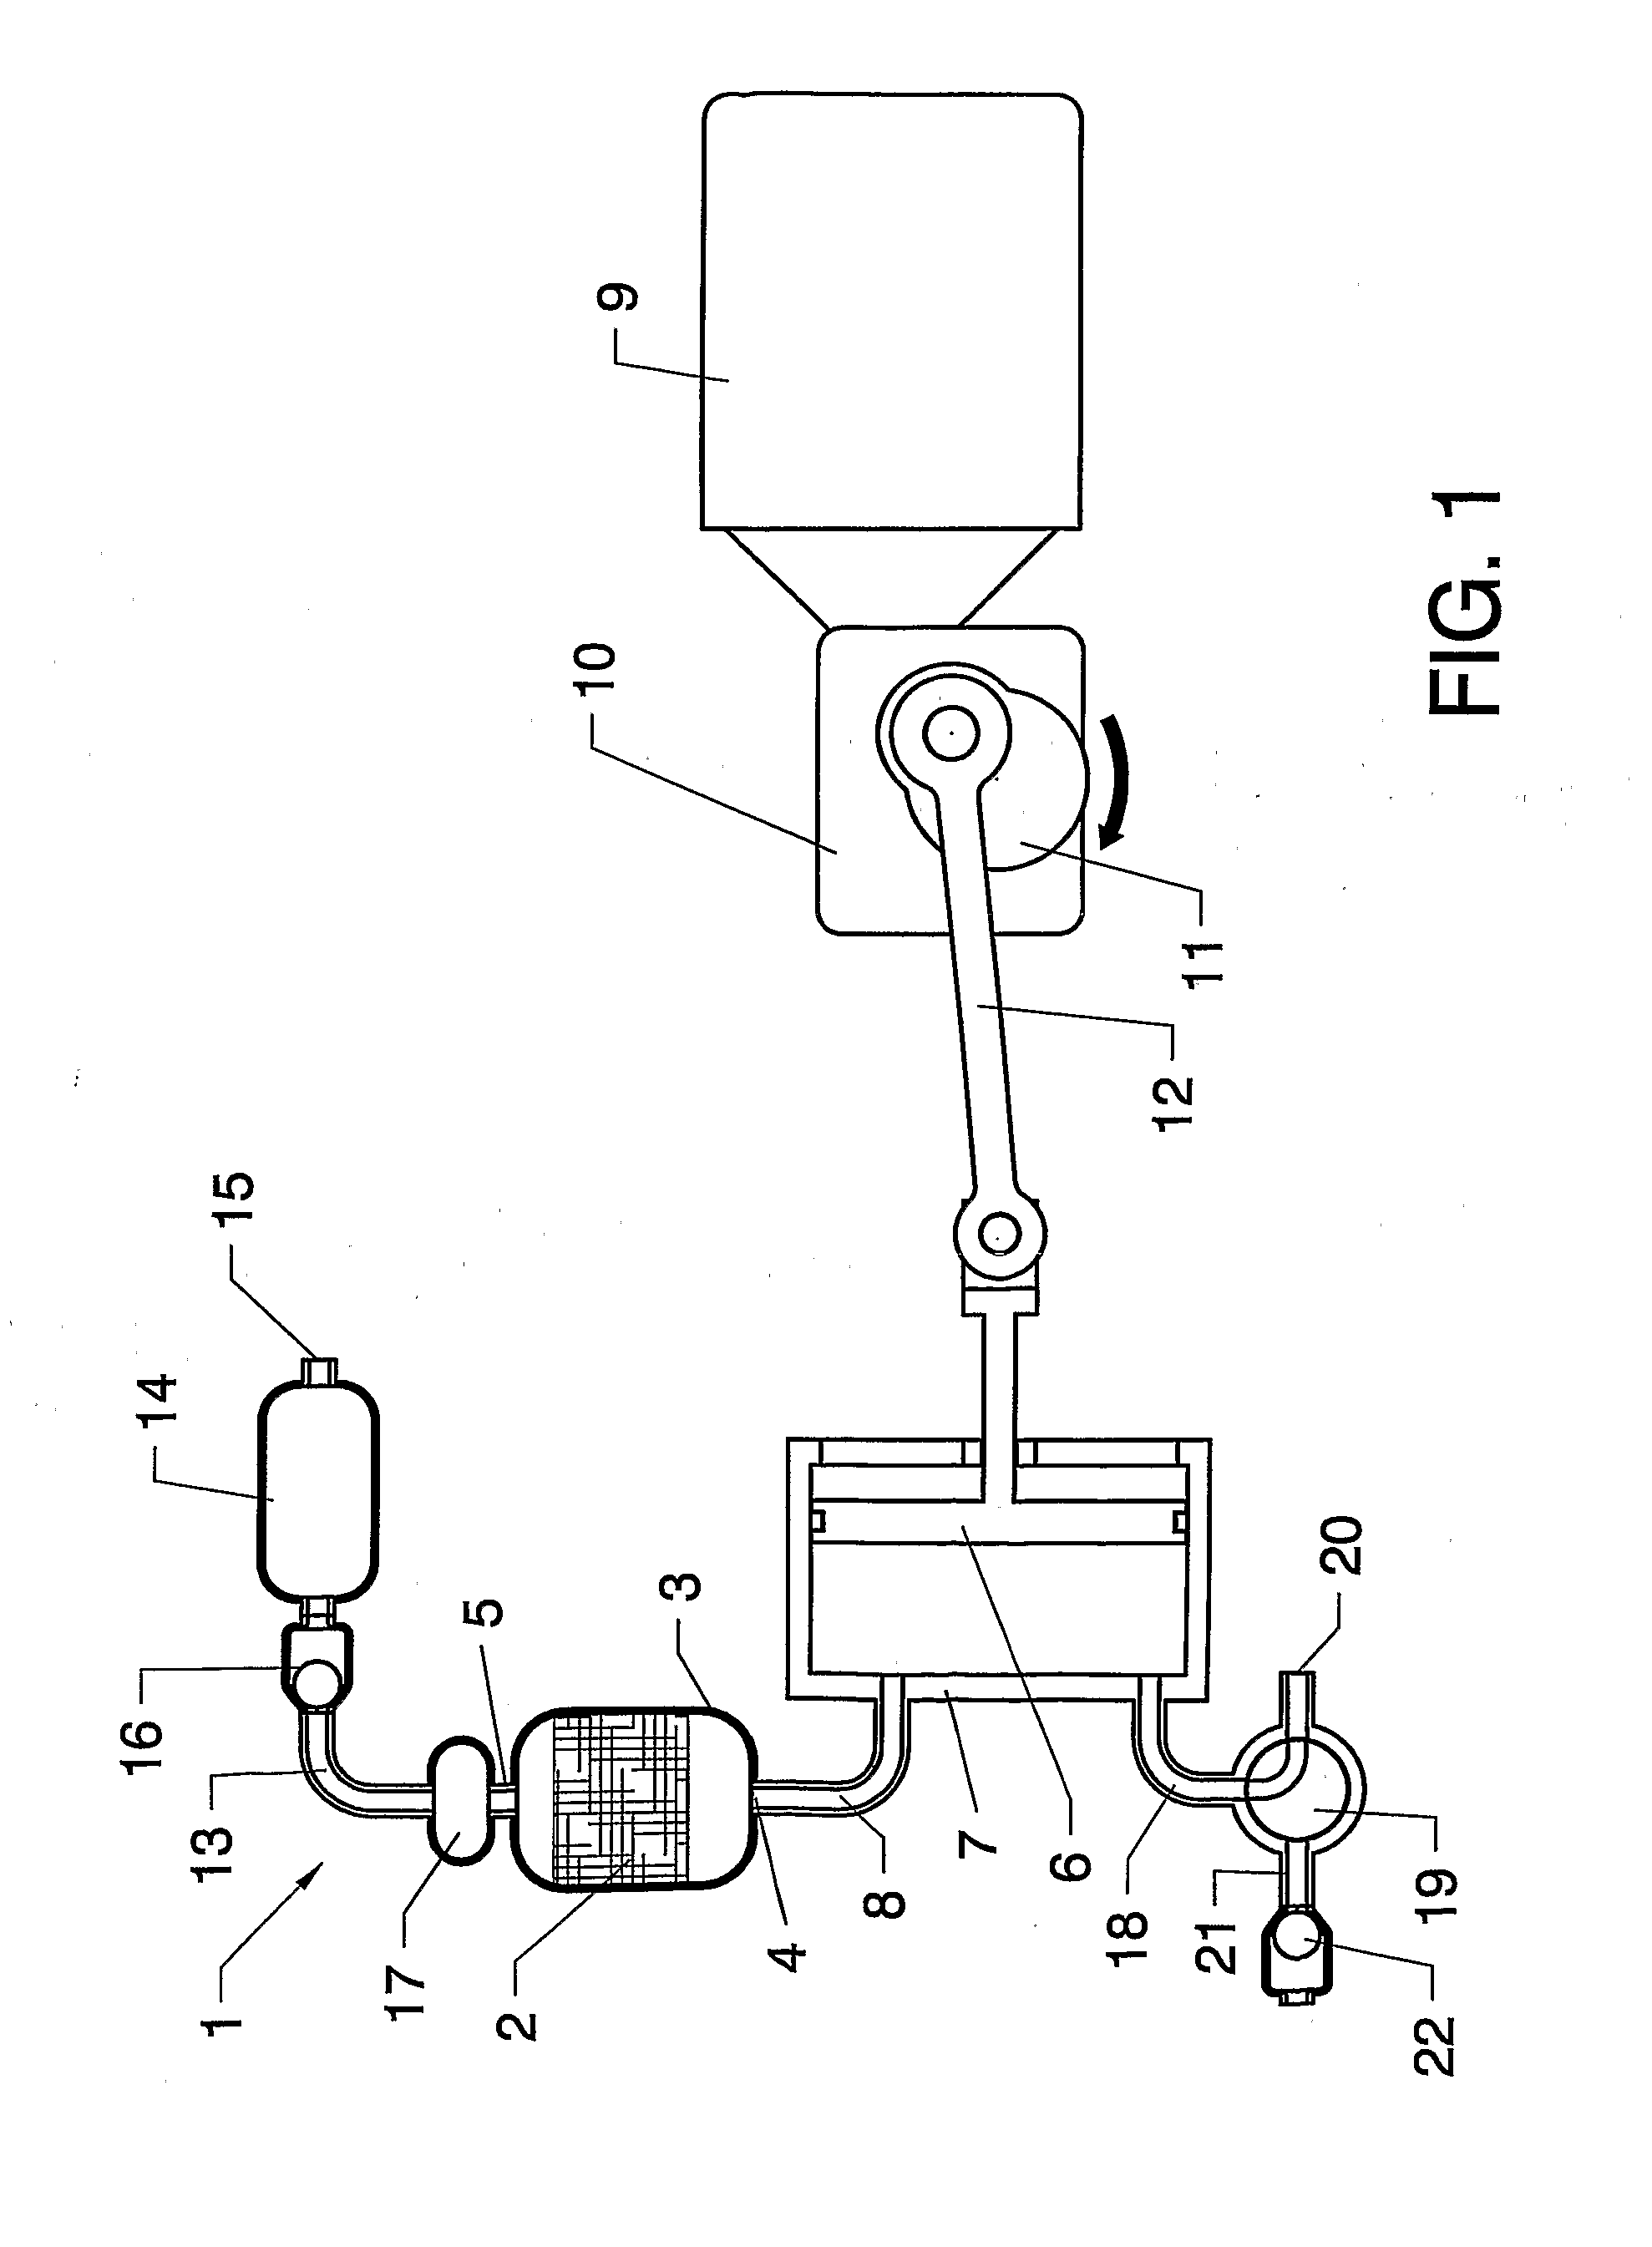 Vacuum pressure swing absorption system and method